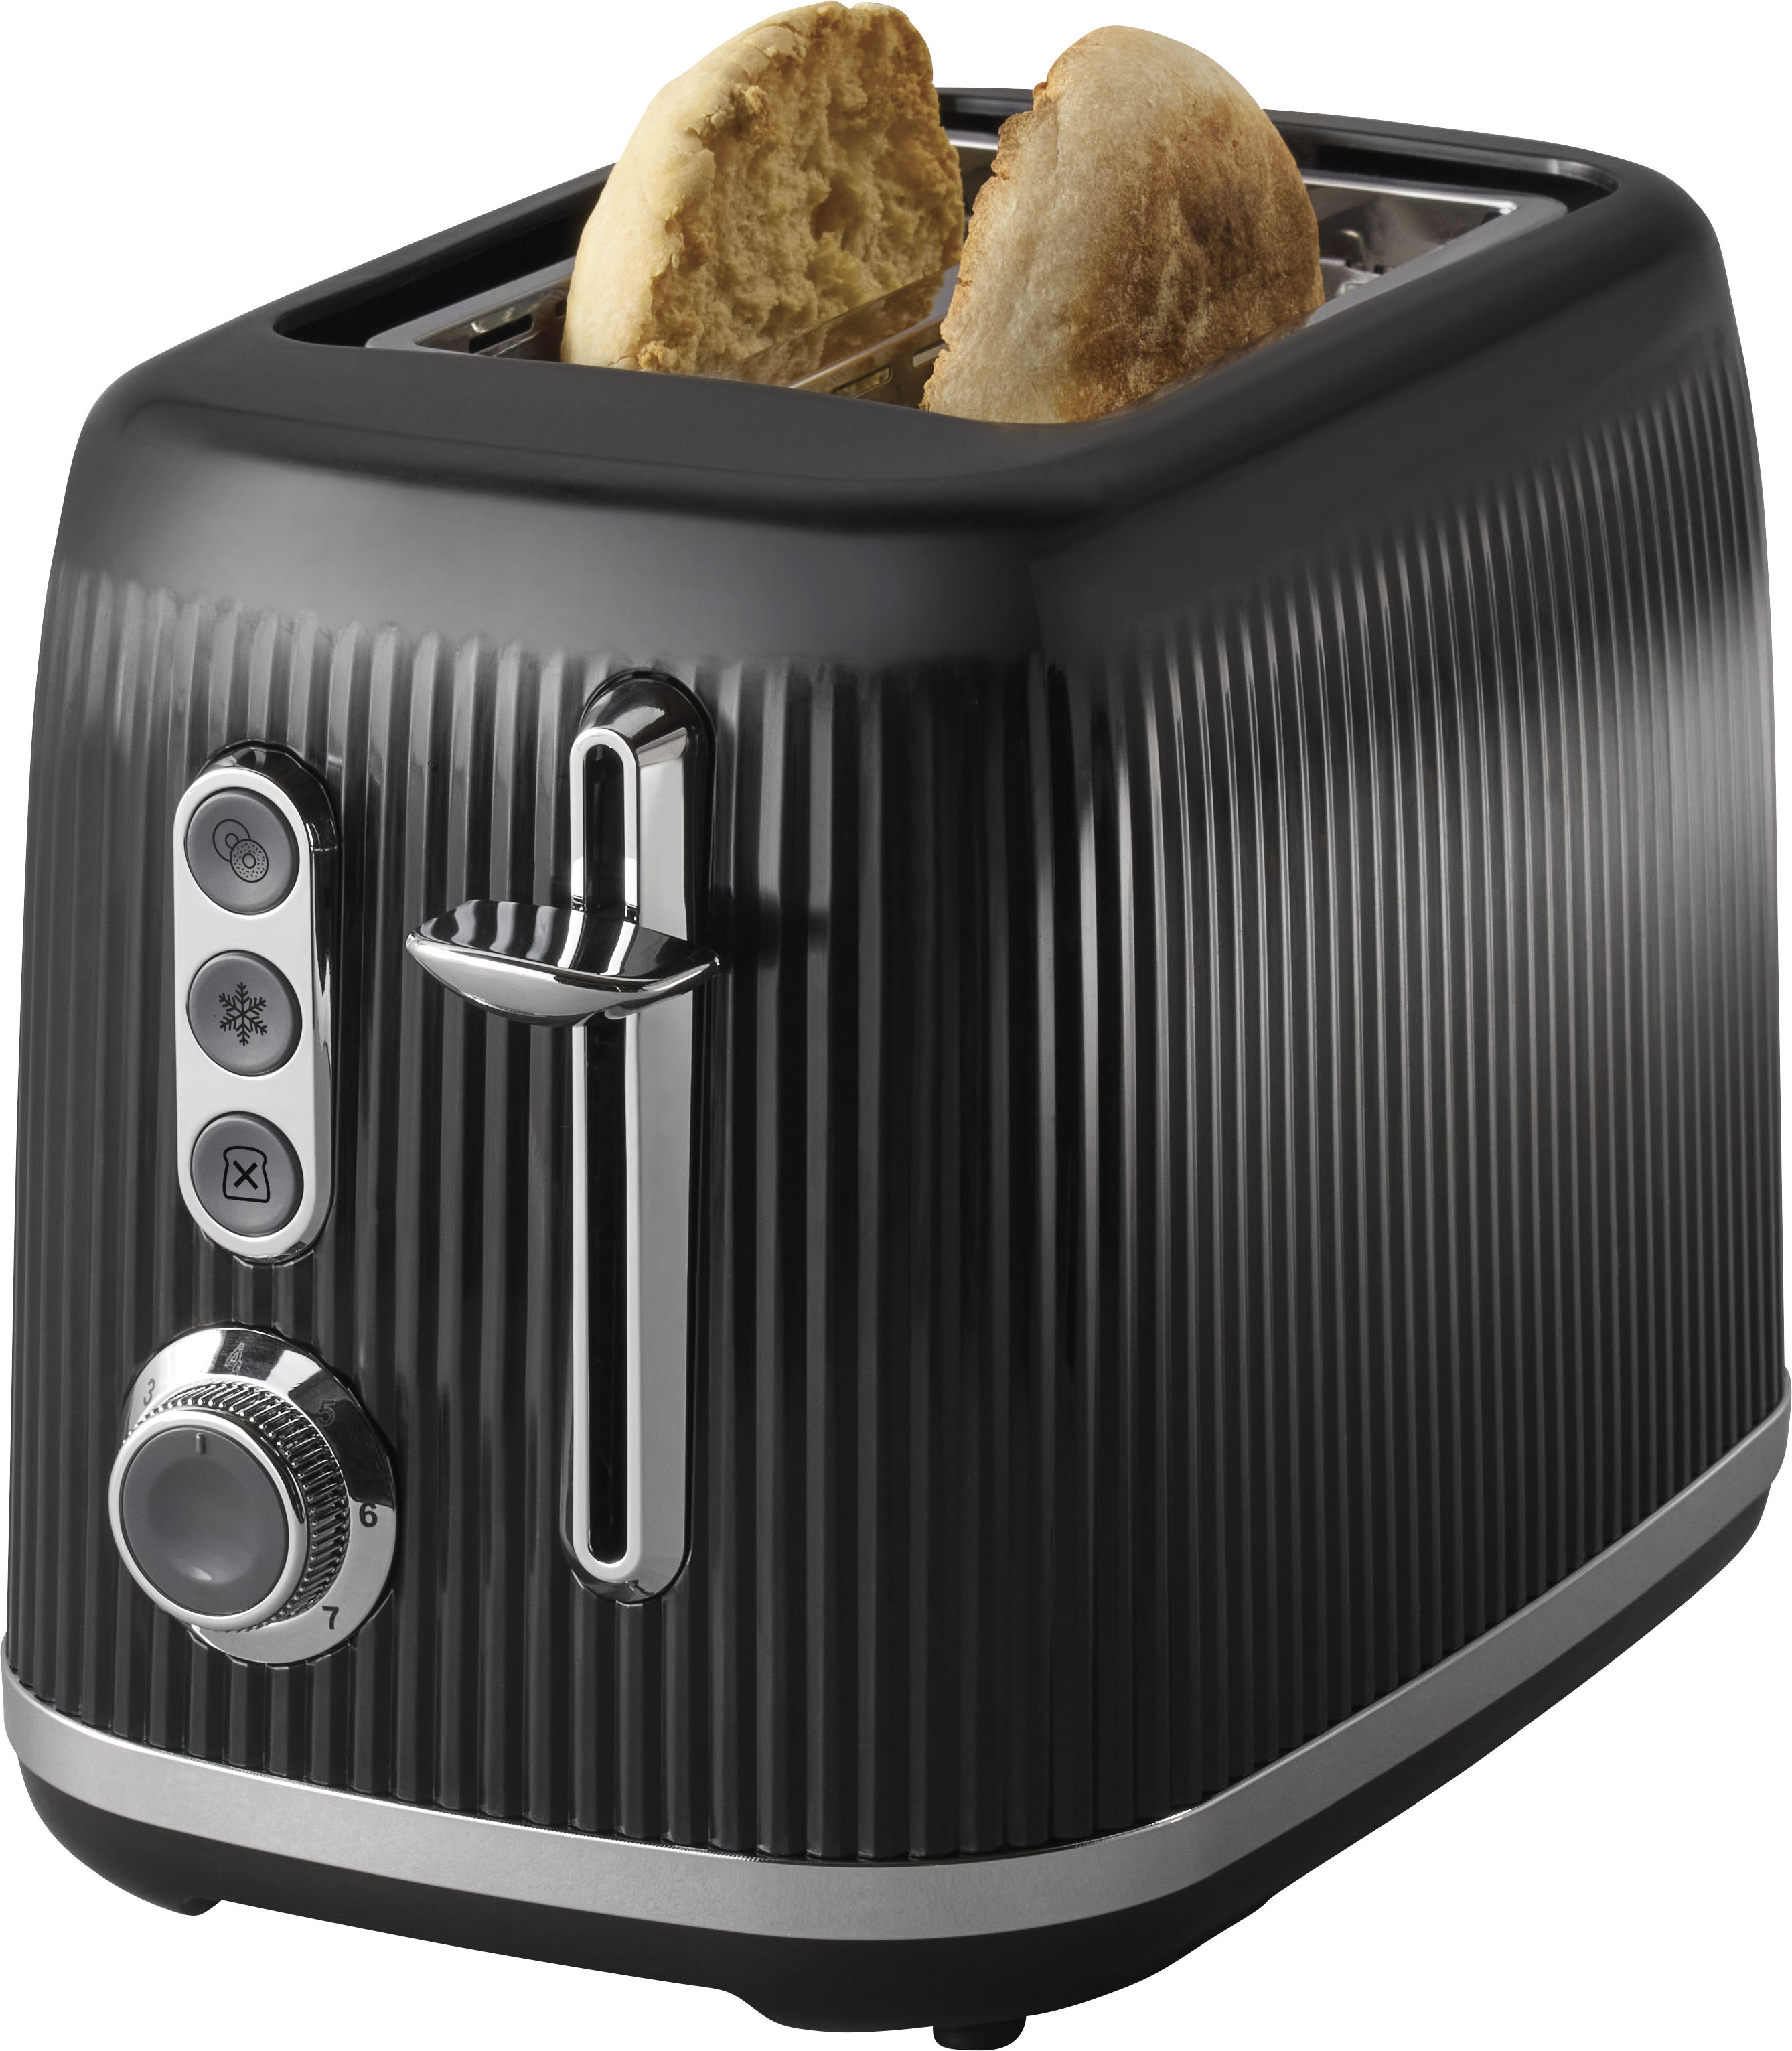 Oster 2 Slice Black Toaster with Extra-Wide Slots in Brushed Stainless  Steel 985120892M - The Home Depot